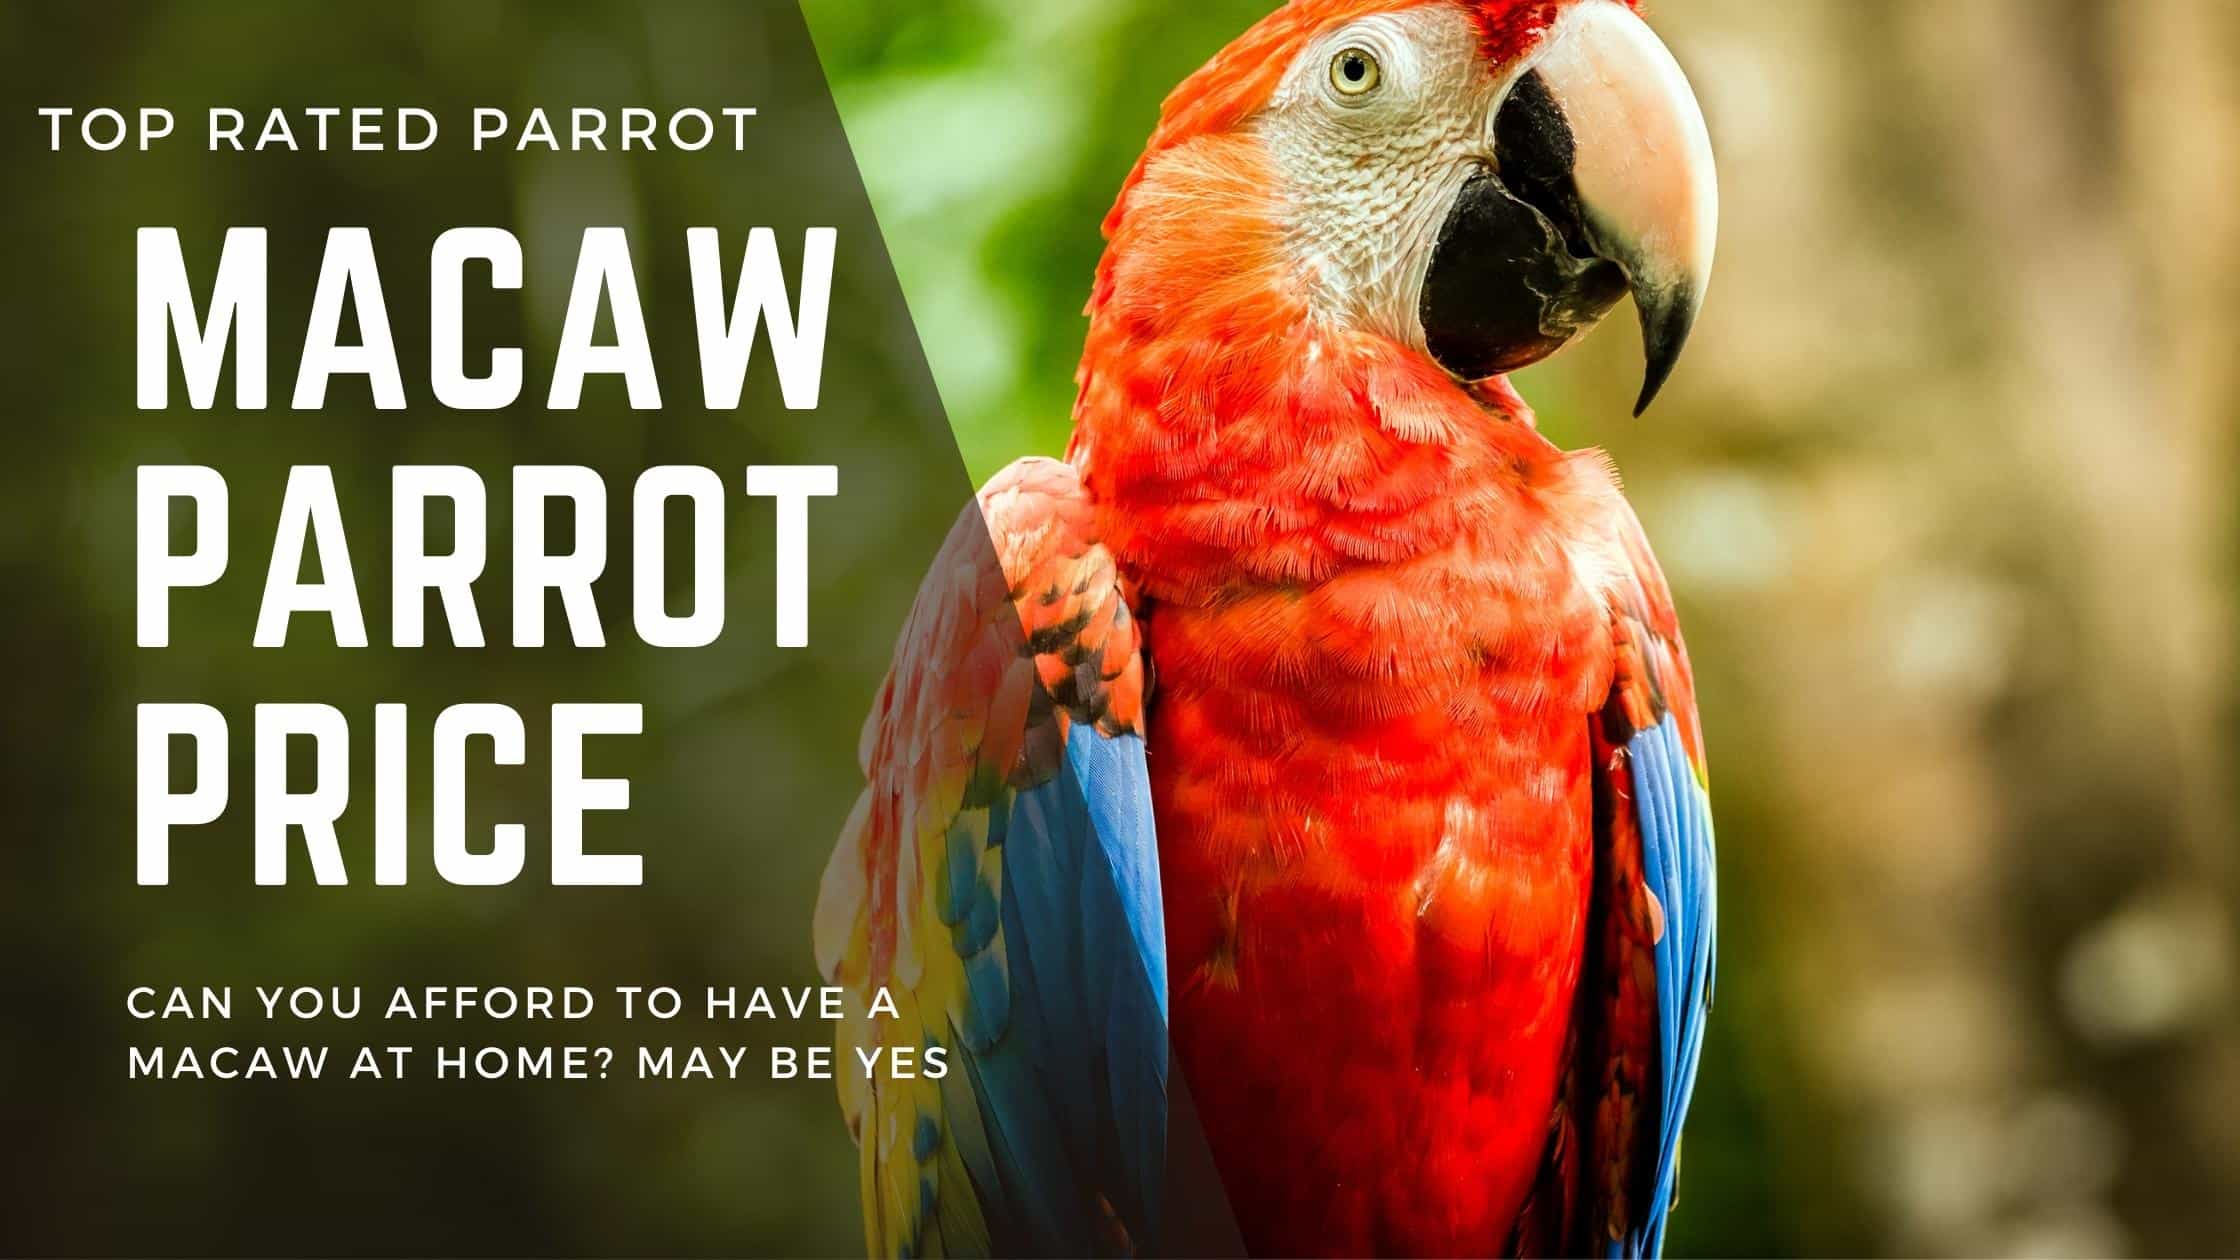 macaw parrot price banner